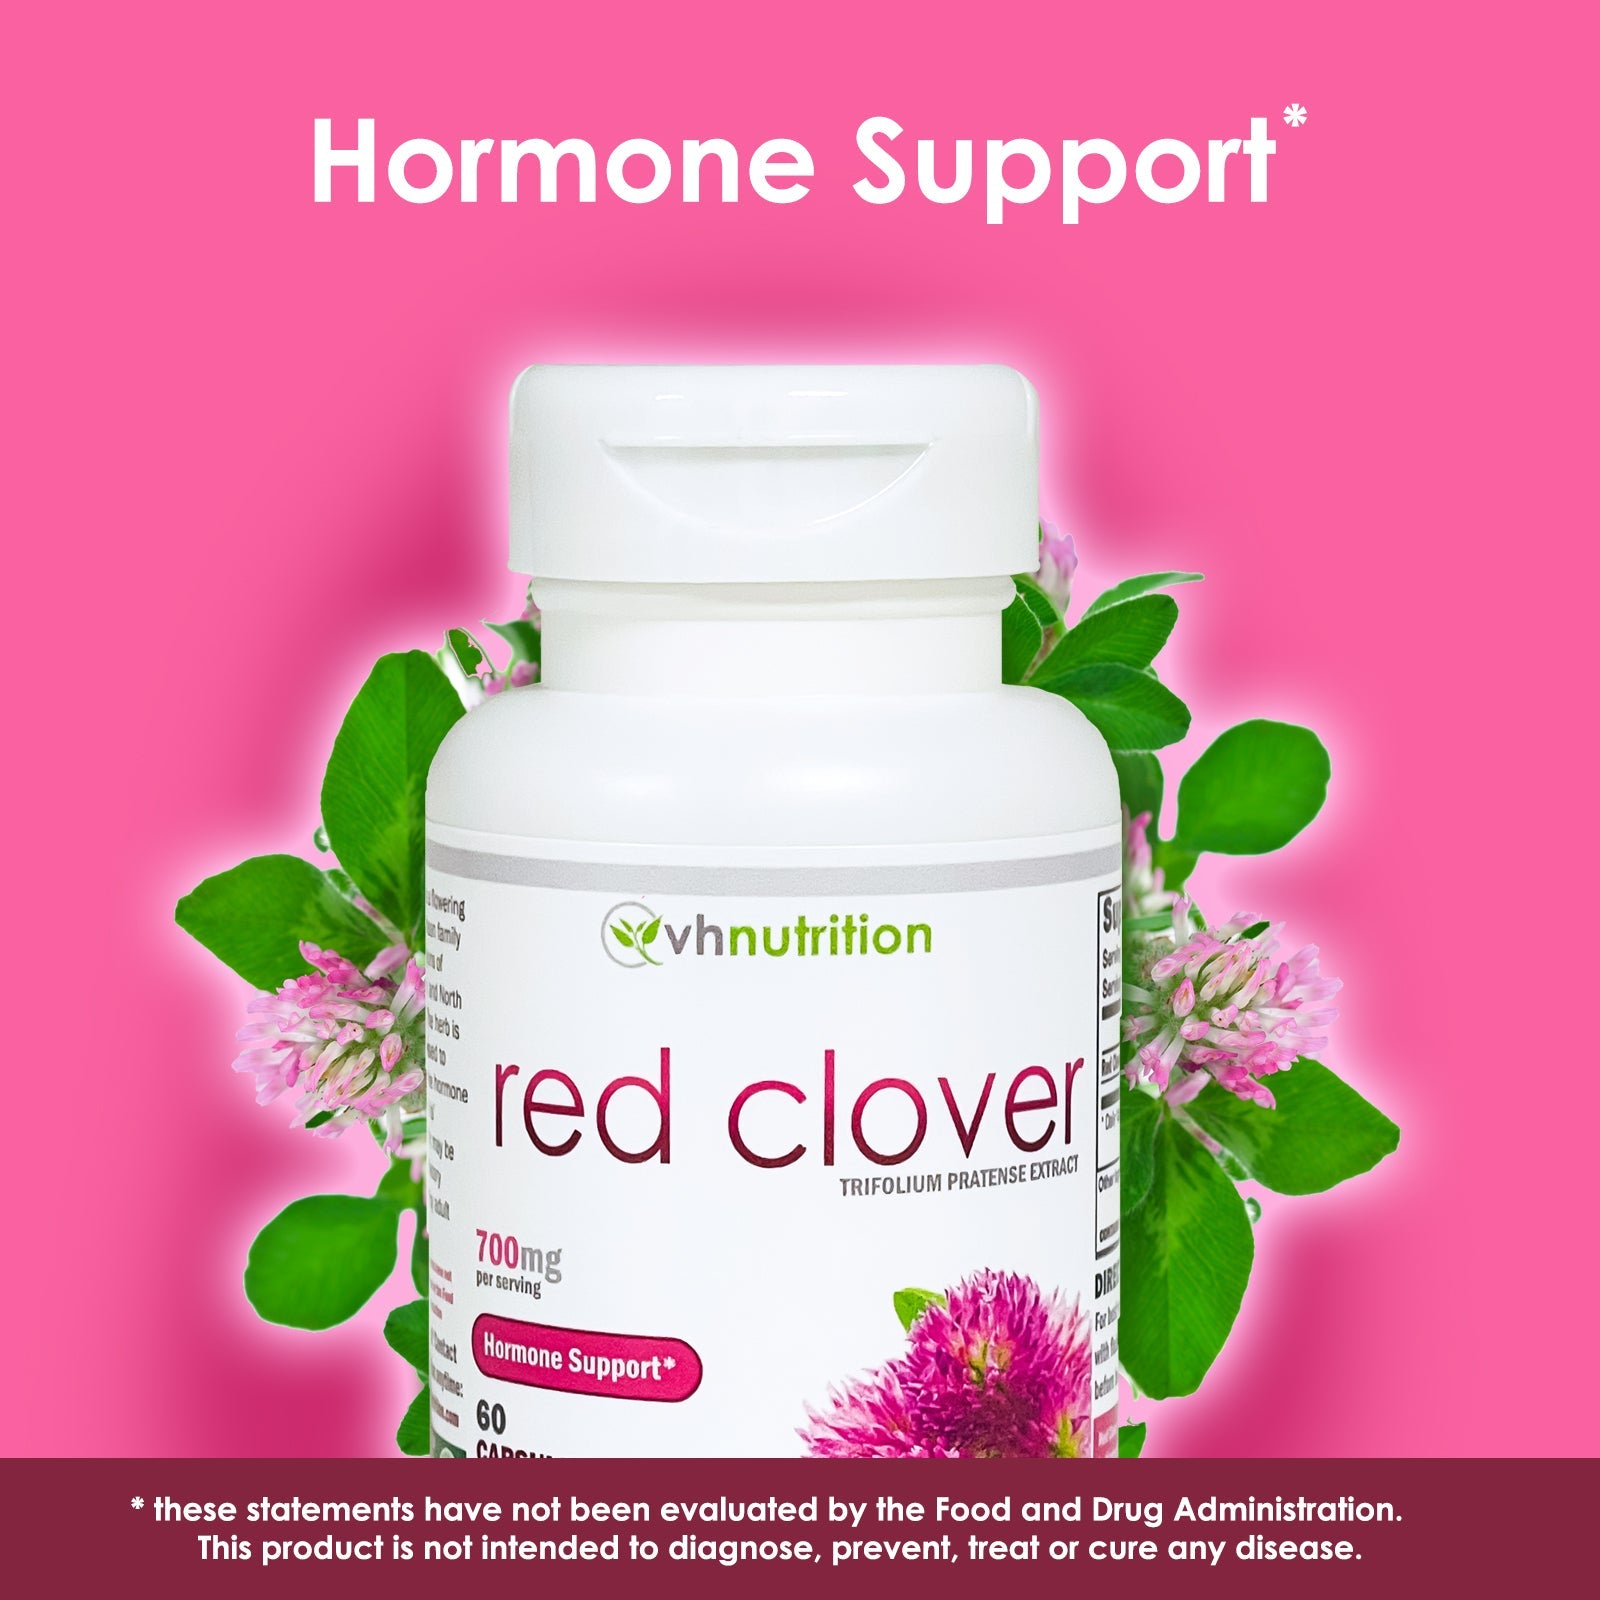 VH Nutrition RED Clover | Red Clover Capsules | 700 mg Trifolium Pratense Extract | Hormone Balance* and Menopause Support* for Women | 60 Capsules